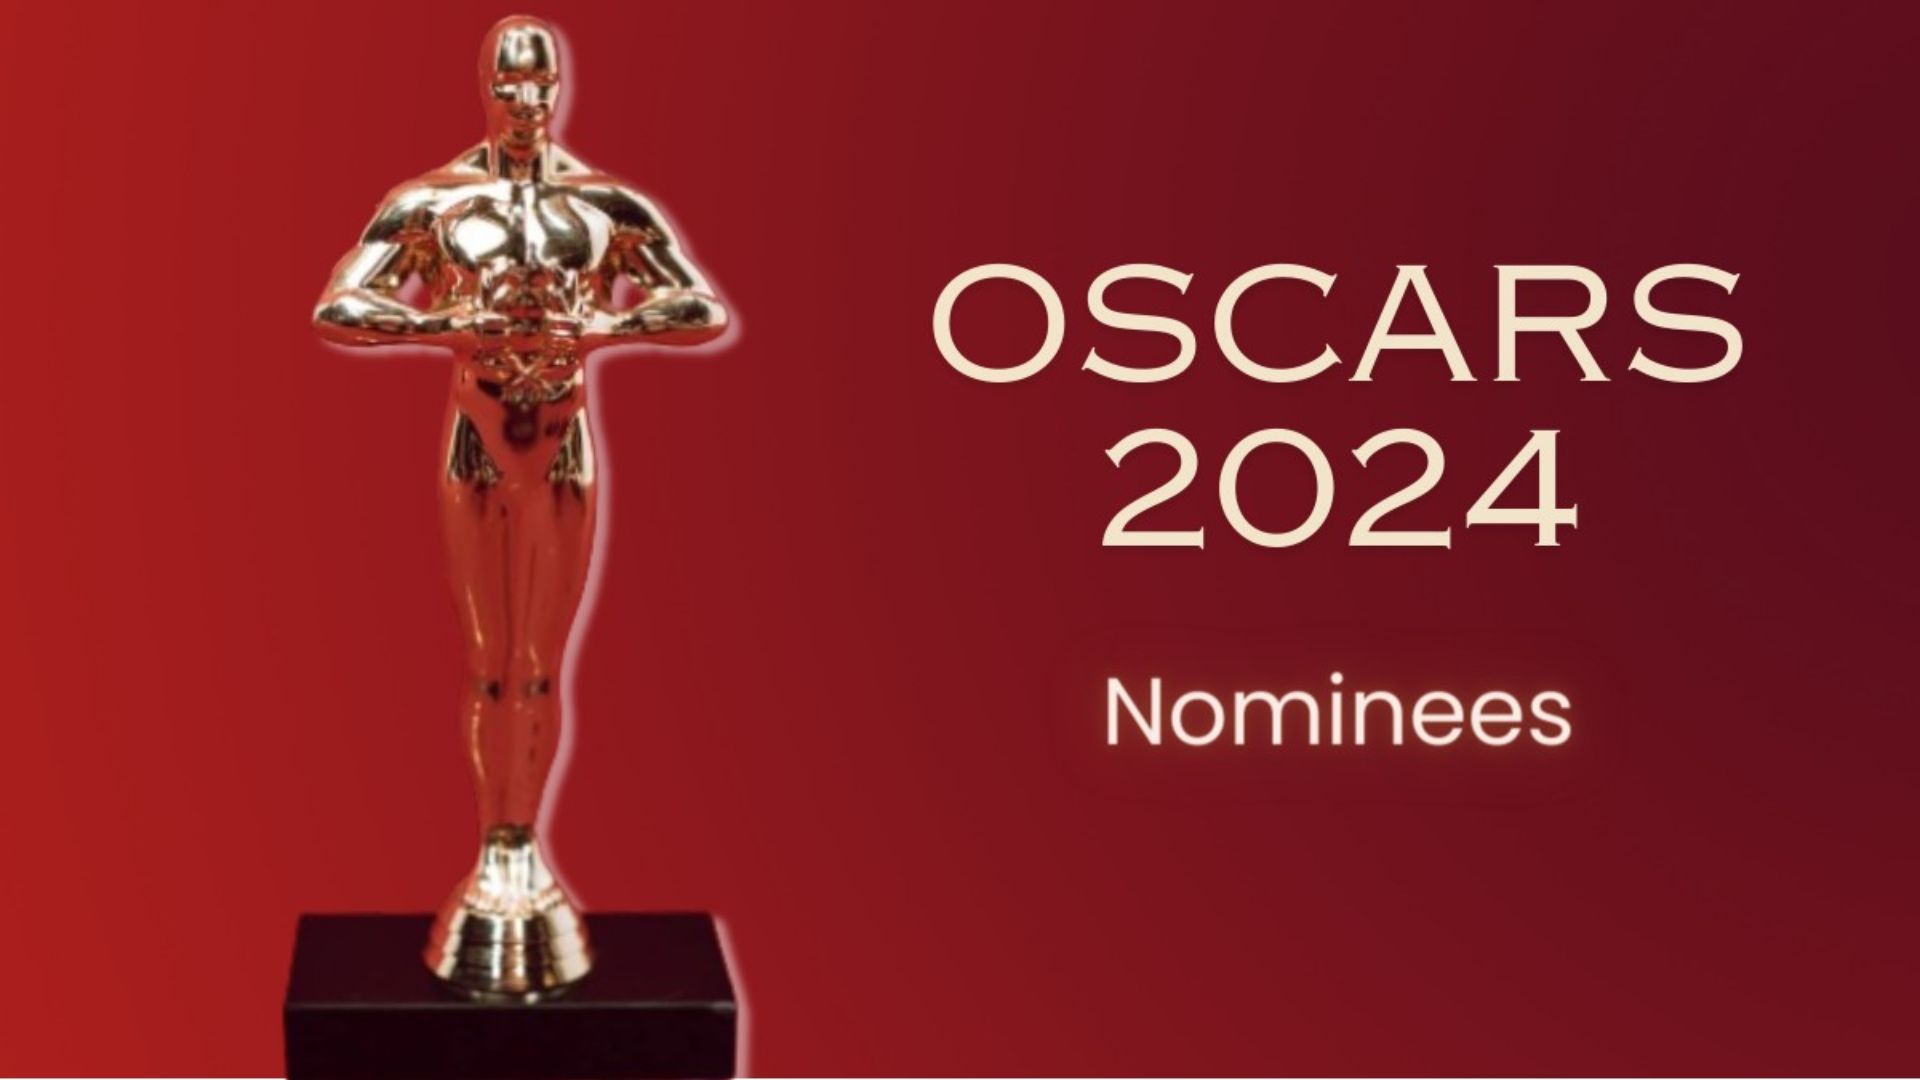 Oscars 2024: A look at the complete list of nominees